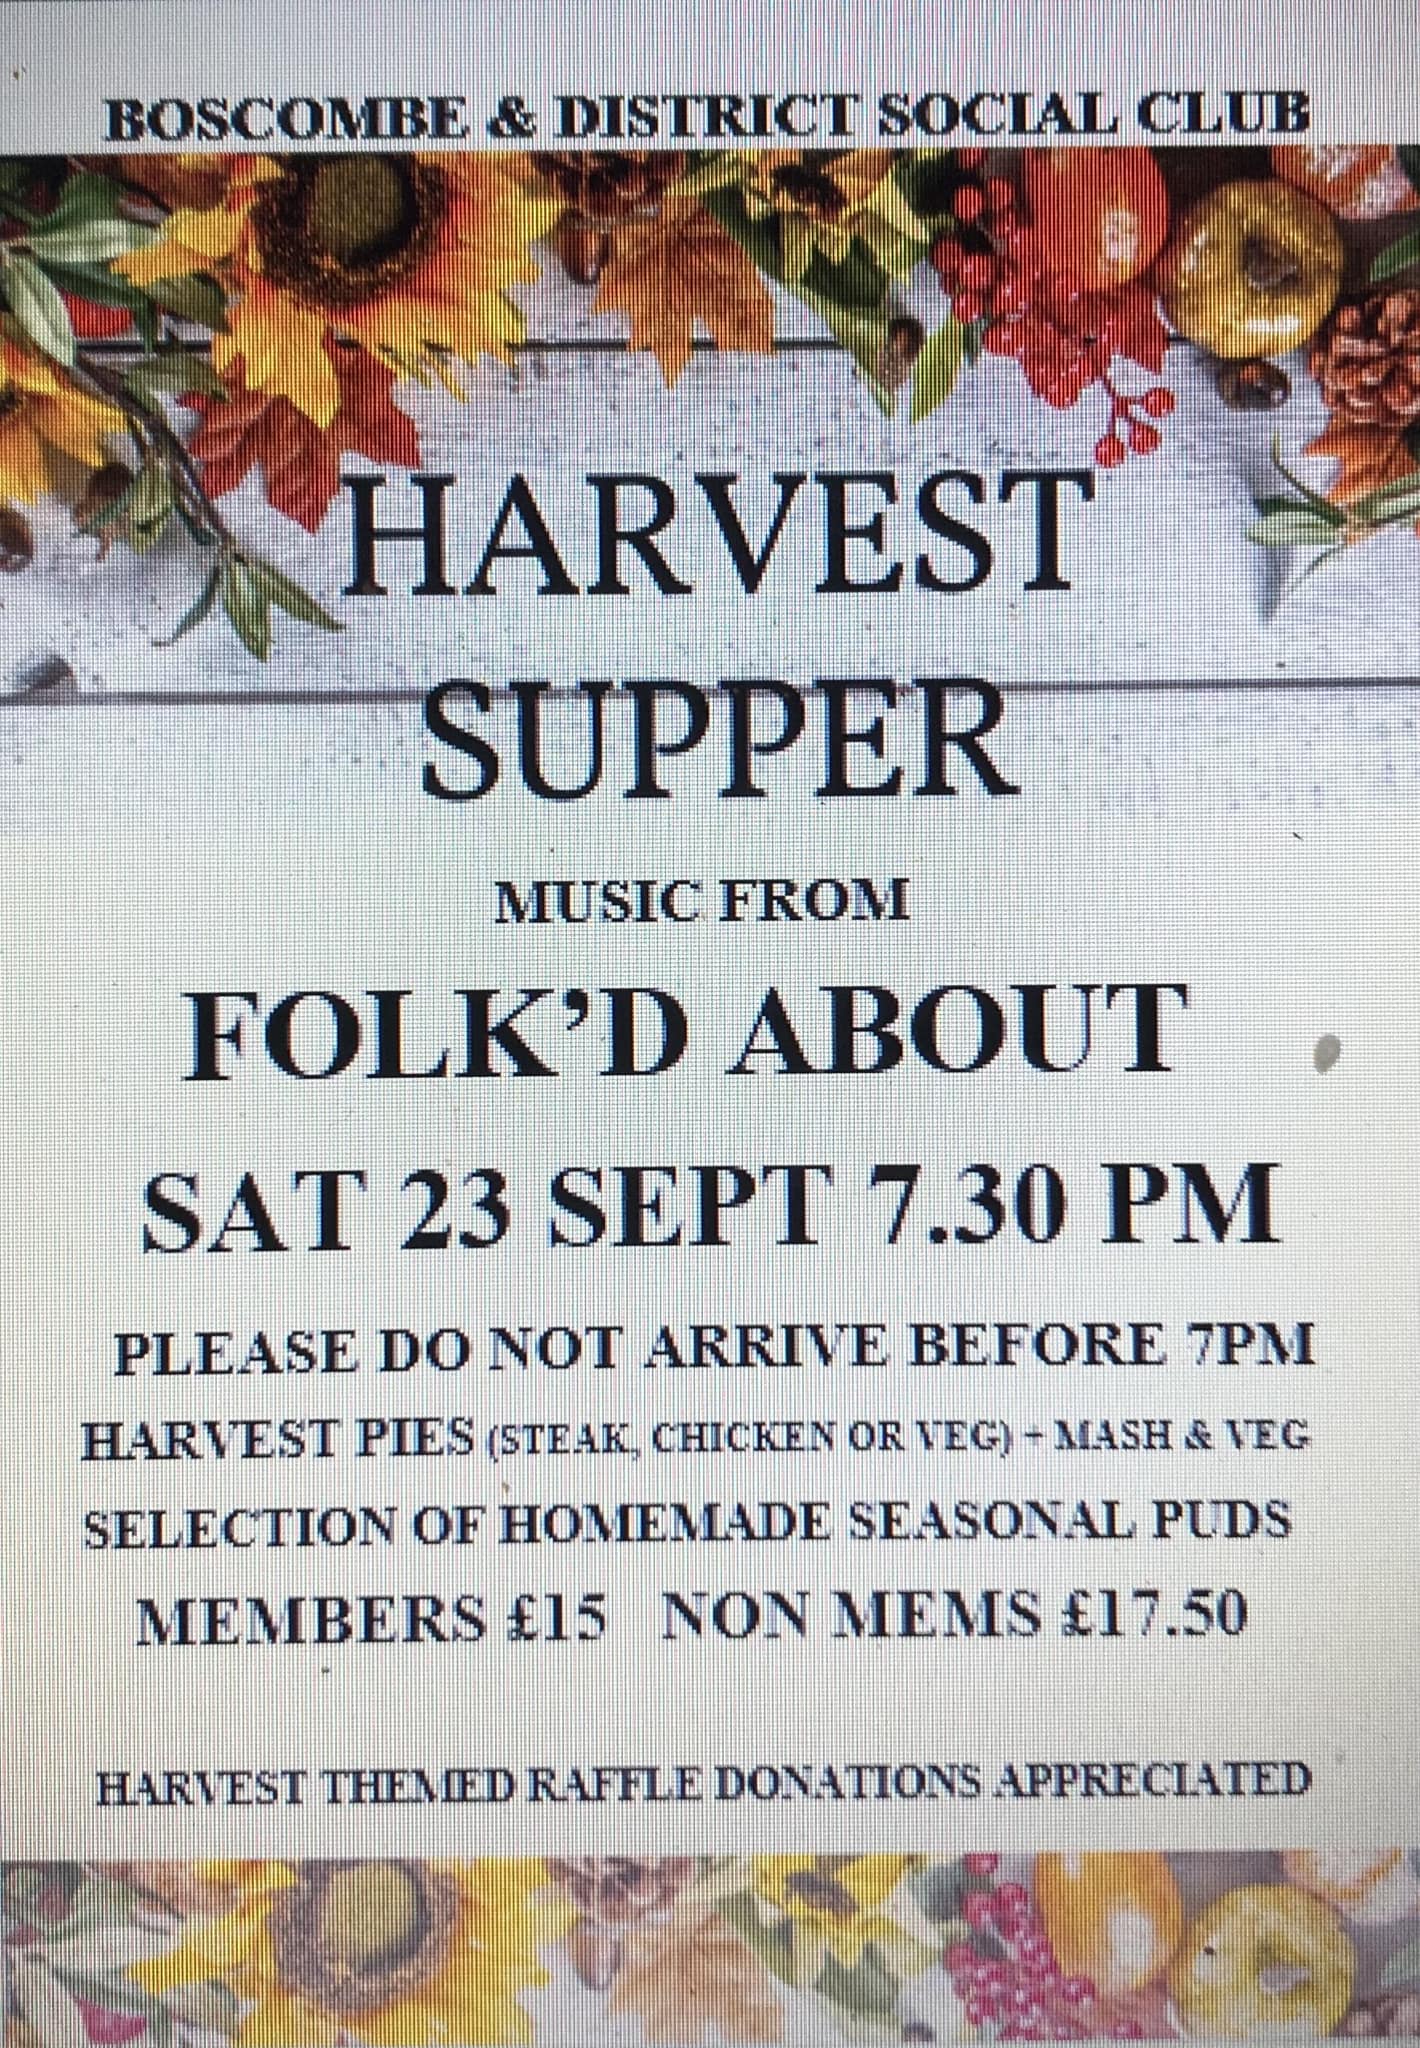 Harvest Support with music from Folk'd About